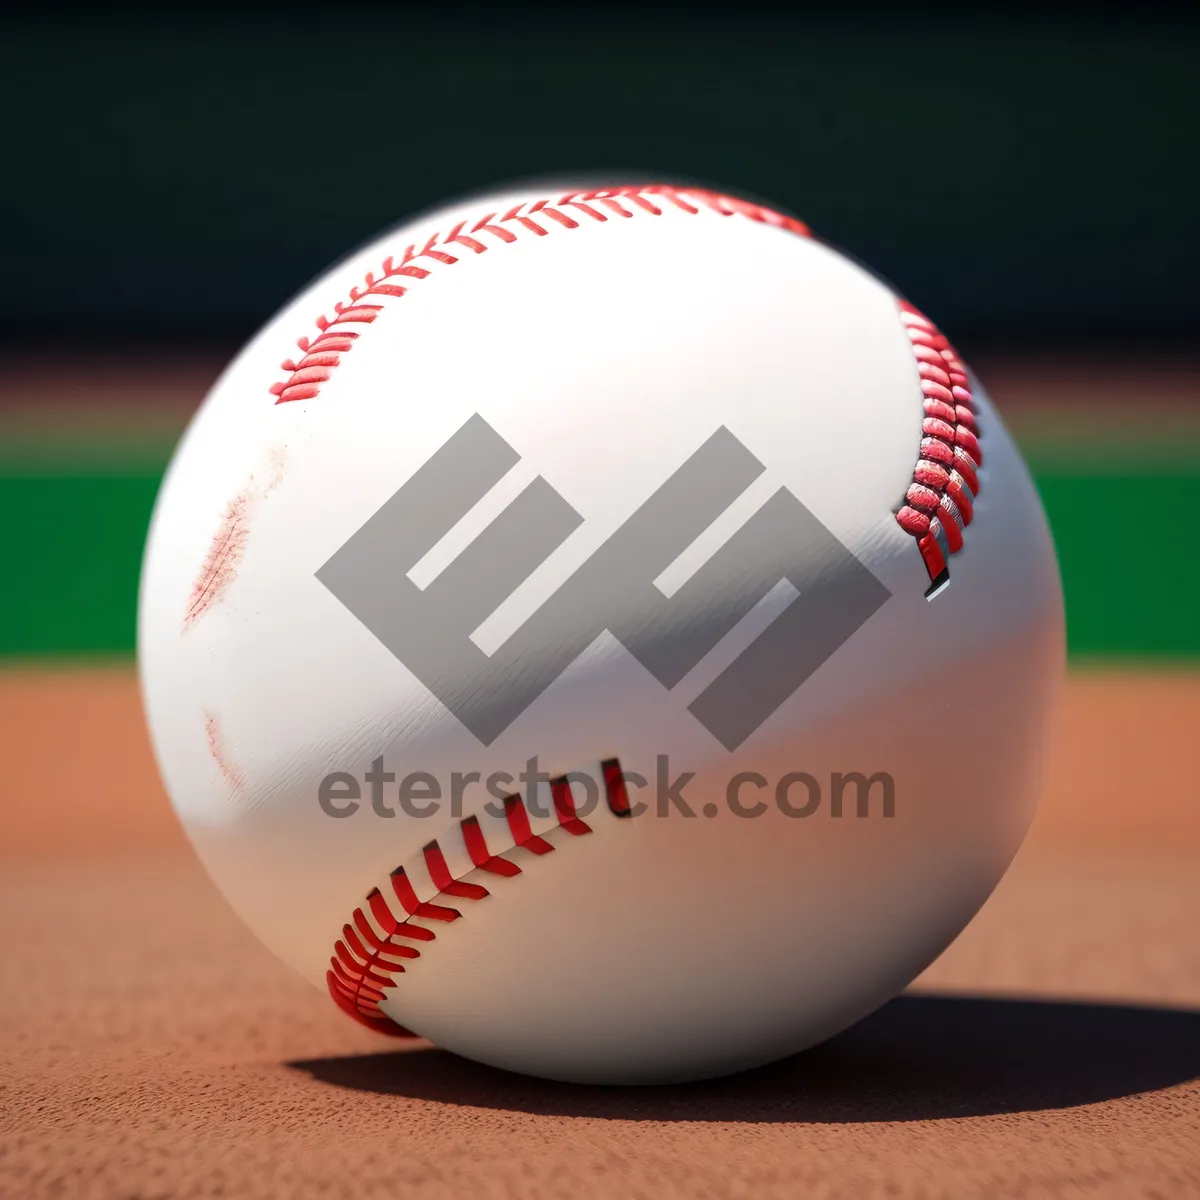 Picture of Baseball game equipment on lush green grass